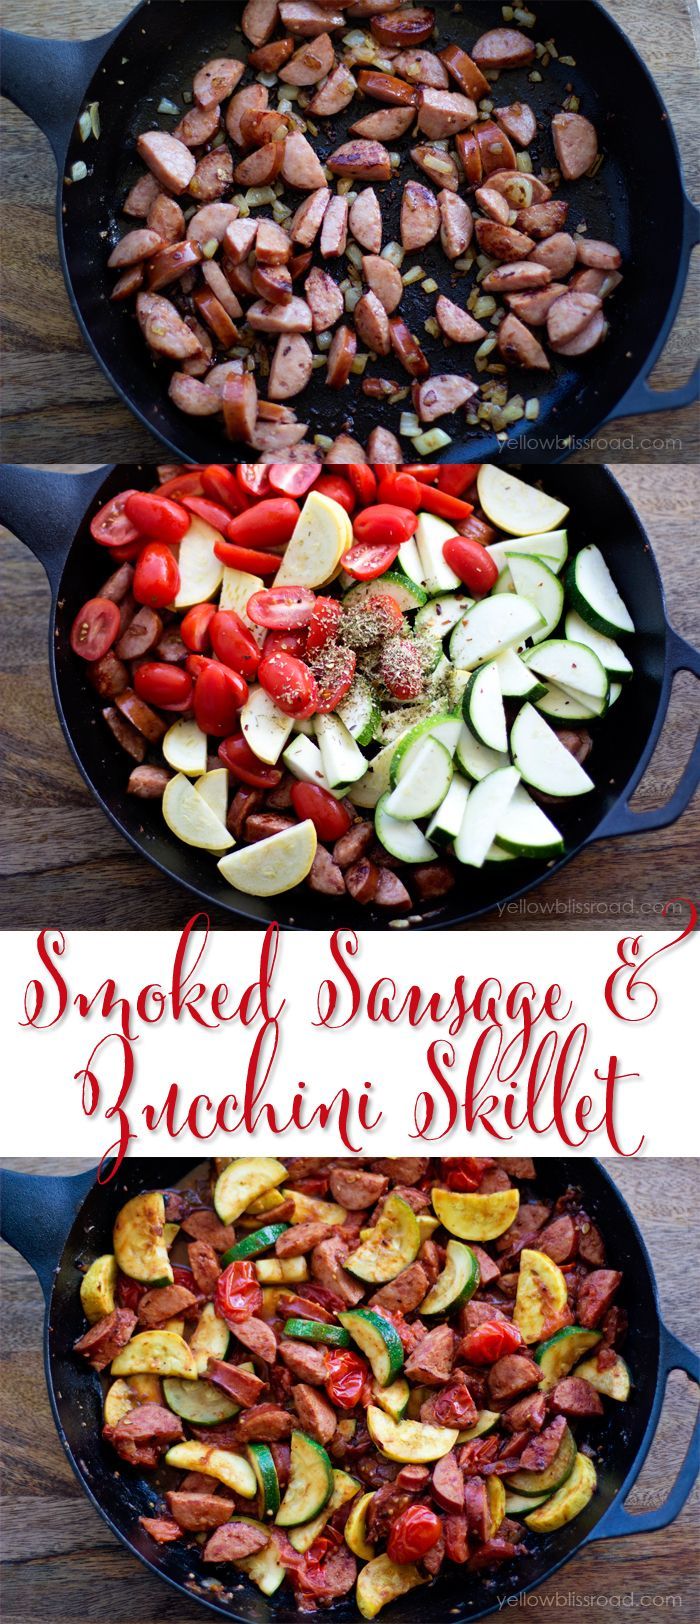 Amazing Smoked Sausage and Zucchini Skillet – This was so good!!!